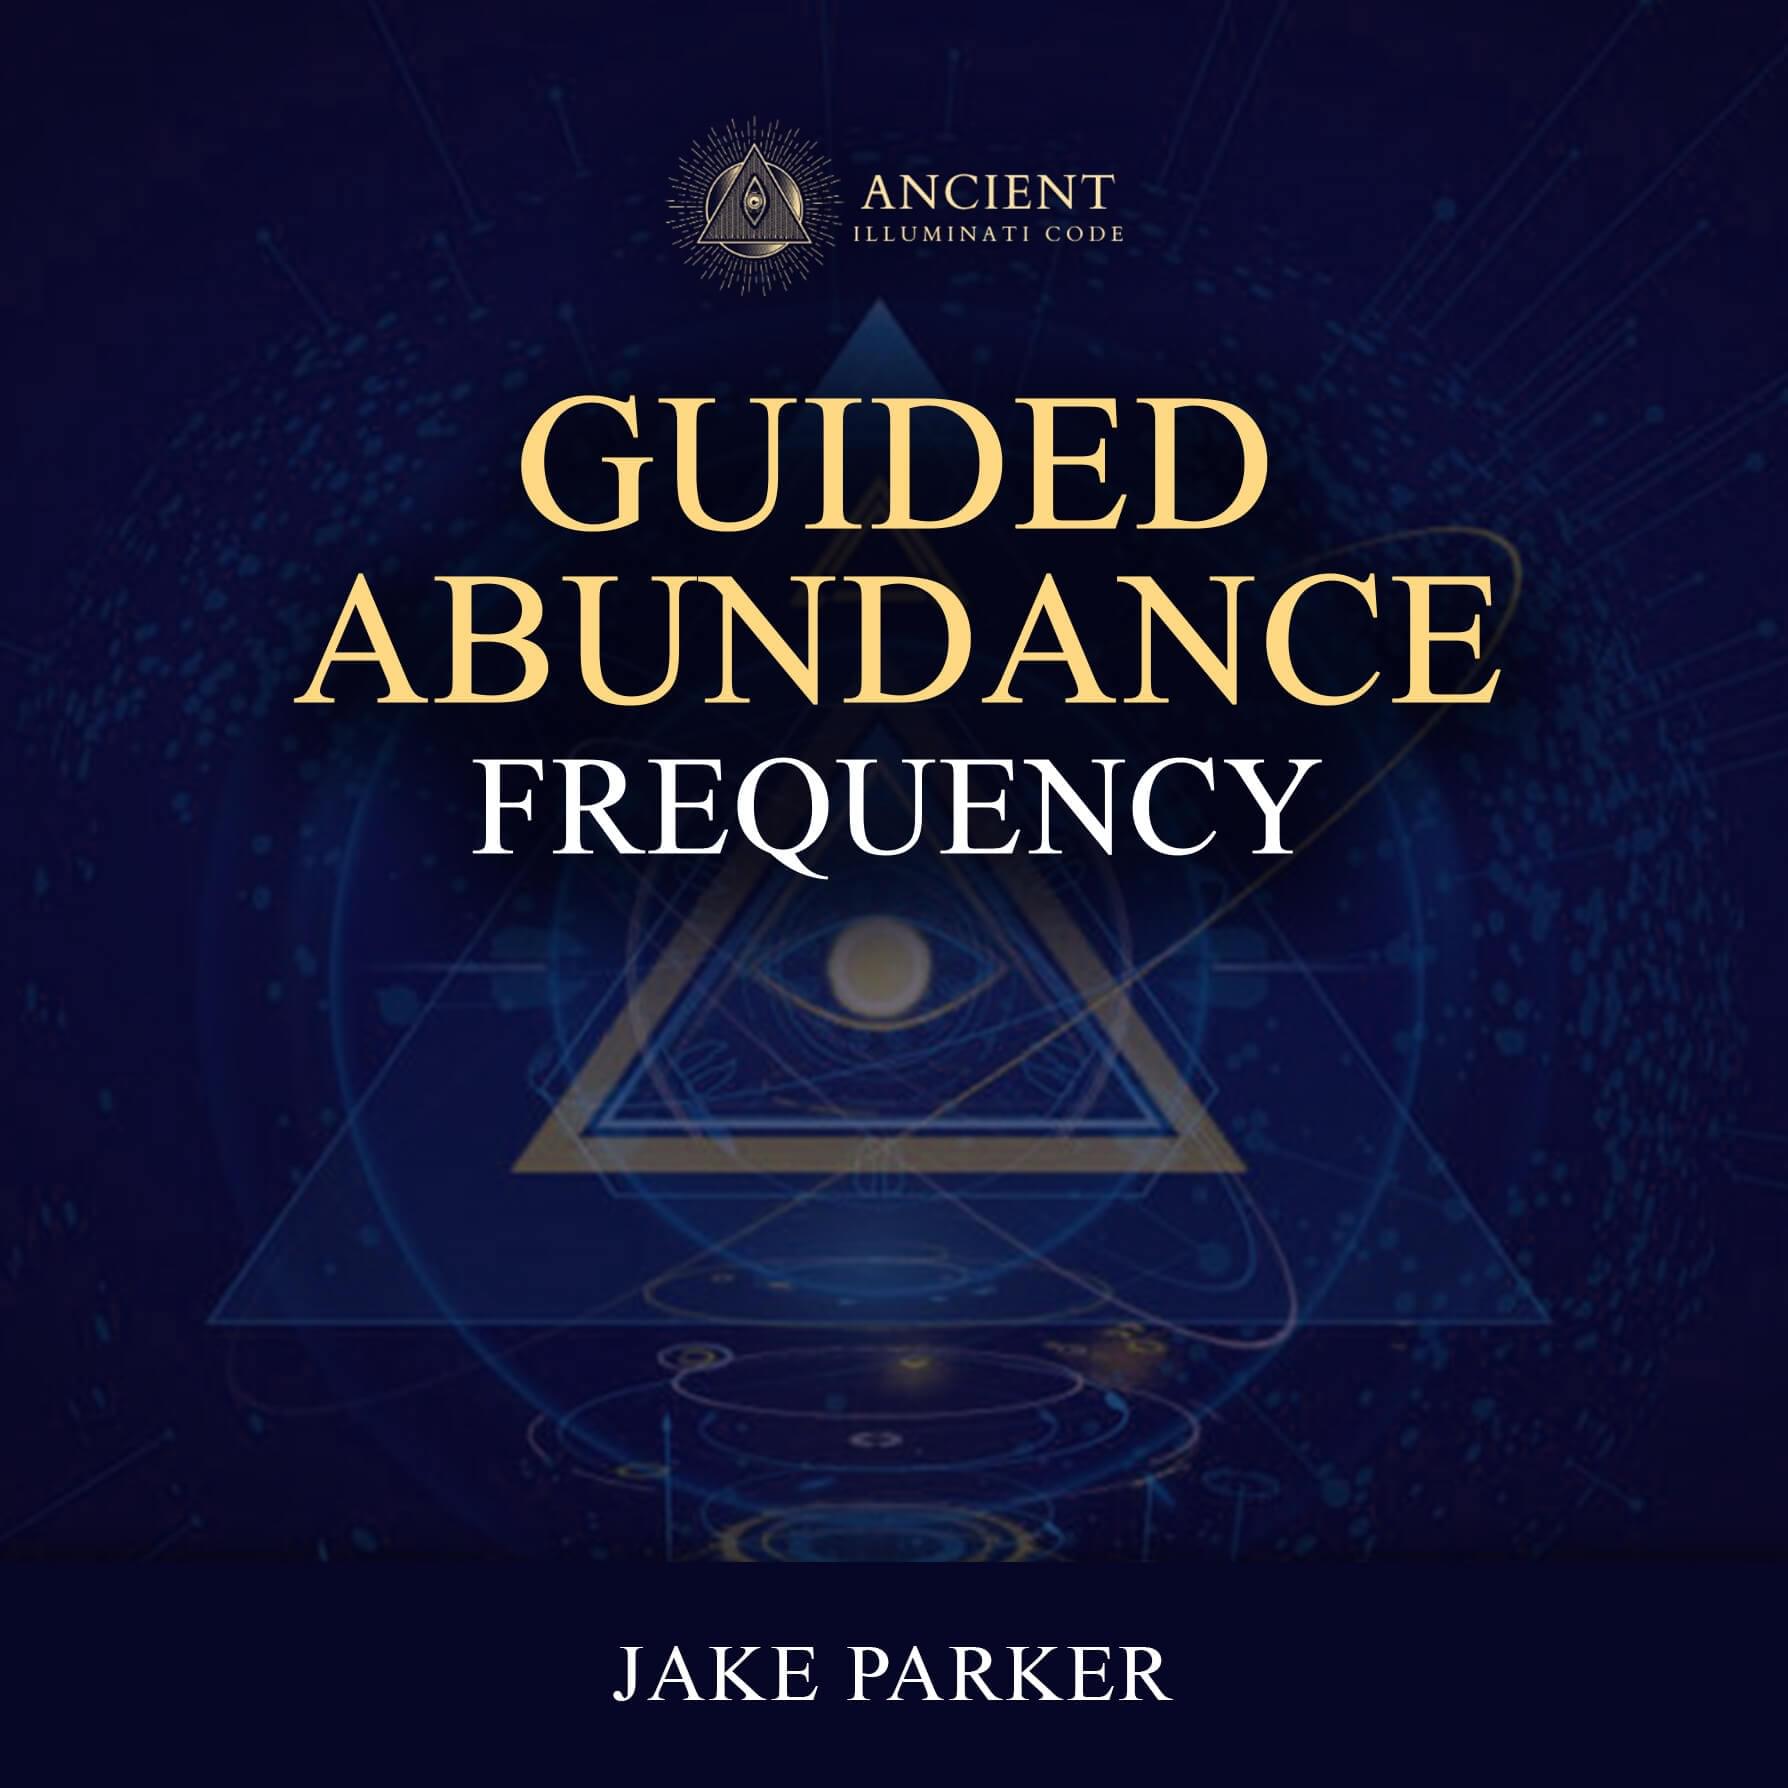 guided abundance frequency jake parker